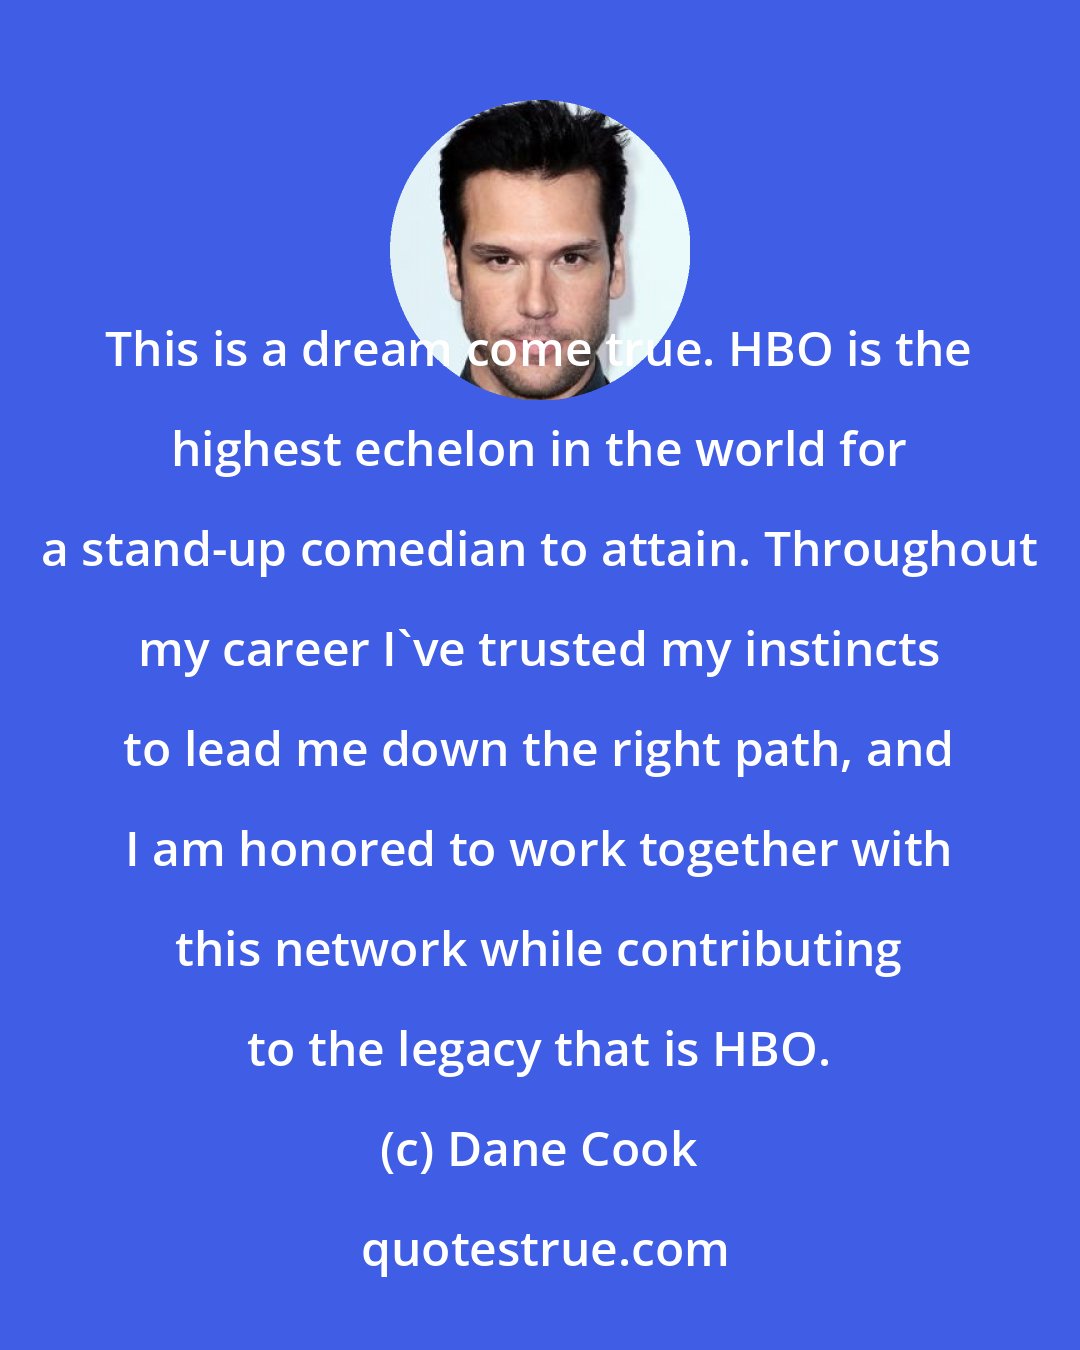 Dane Cook: This is a dream come true. HBO is the highest echelon in the world for a stand-up comedian to attain. Throughout my career I've trusted my instincts to lead me down the right path, and I am honored to work together with this network while contributing to the legacy that is HBO.